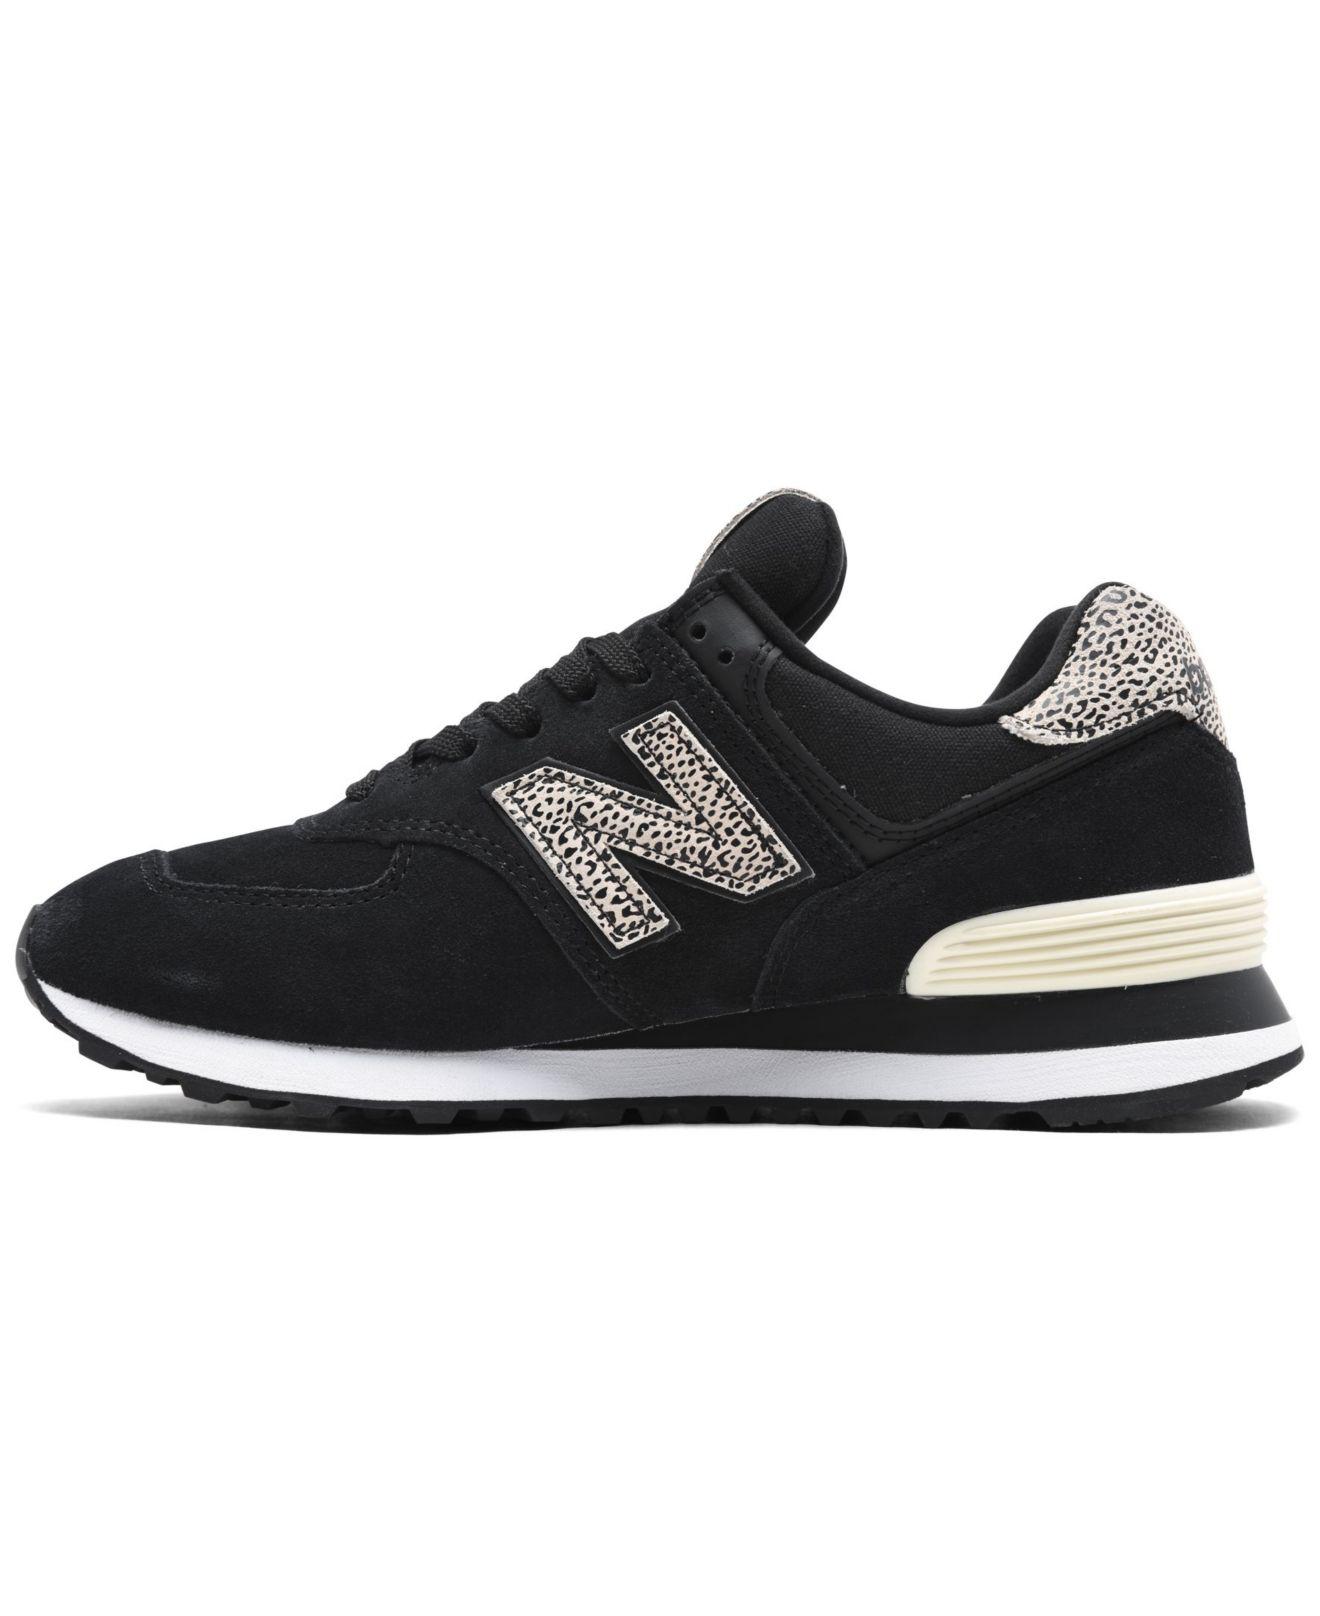 New Balance 574 Leopard Casual Sneakers From Finish Line in Black | Lyst